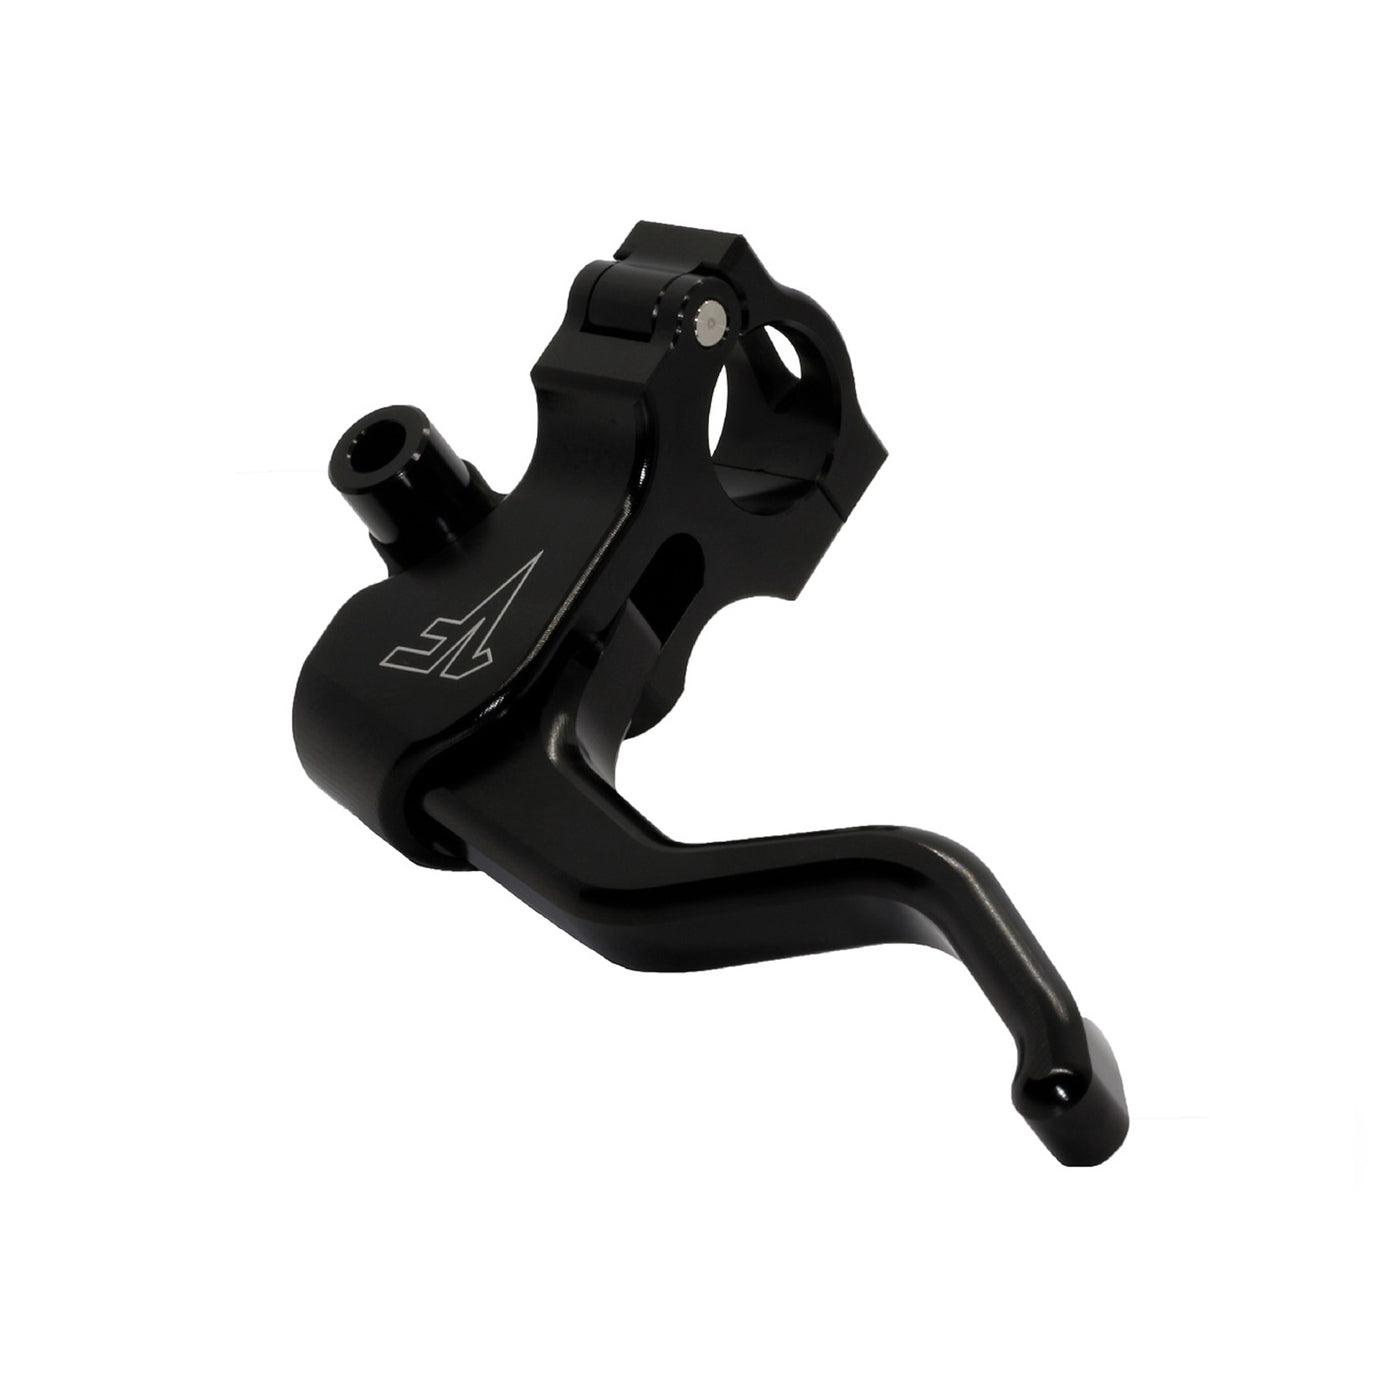 Easier Pull Clutch Lever Assembly | 2FNGR | Black - Dyna/Softail/Sportster